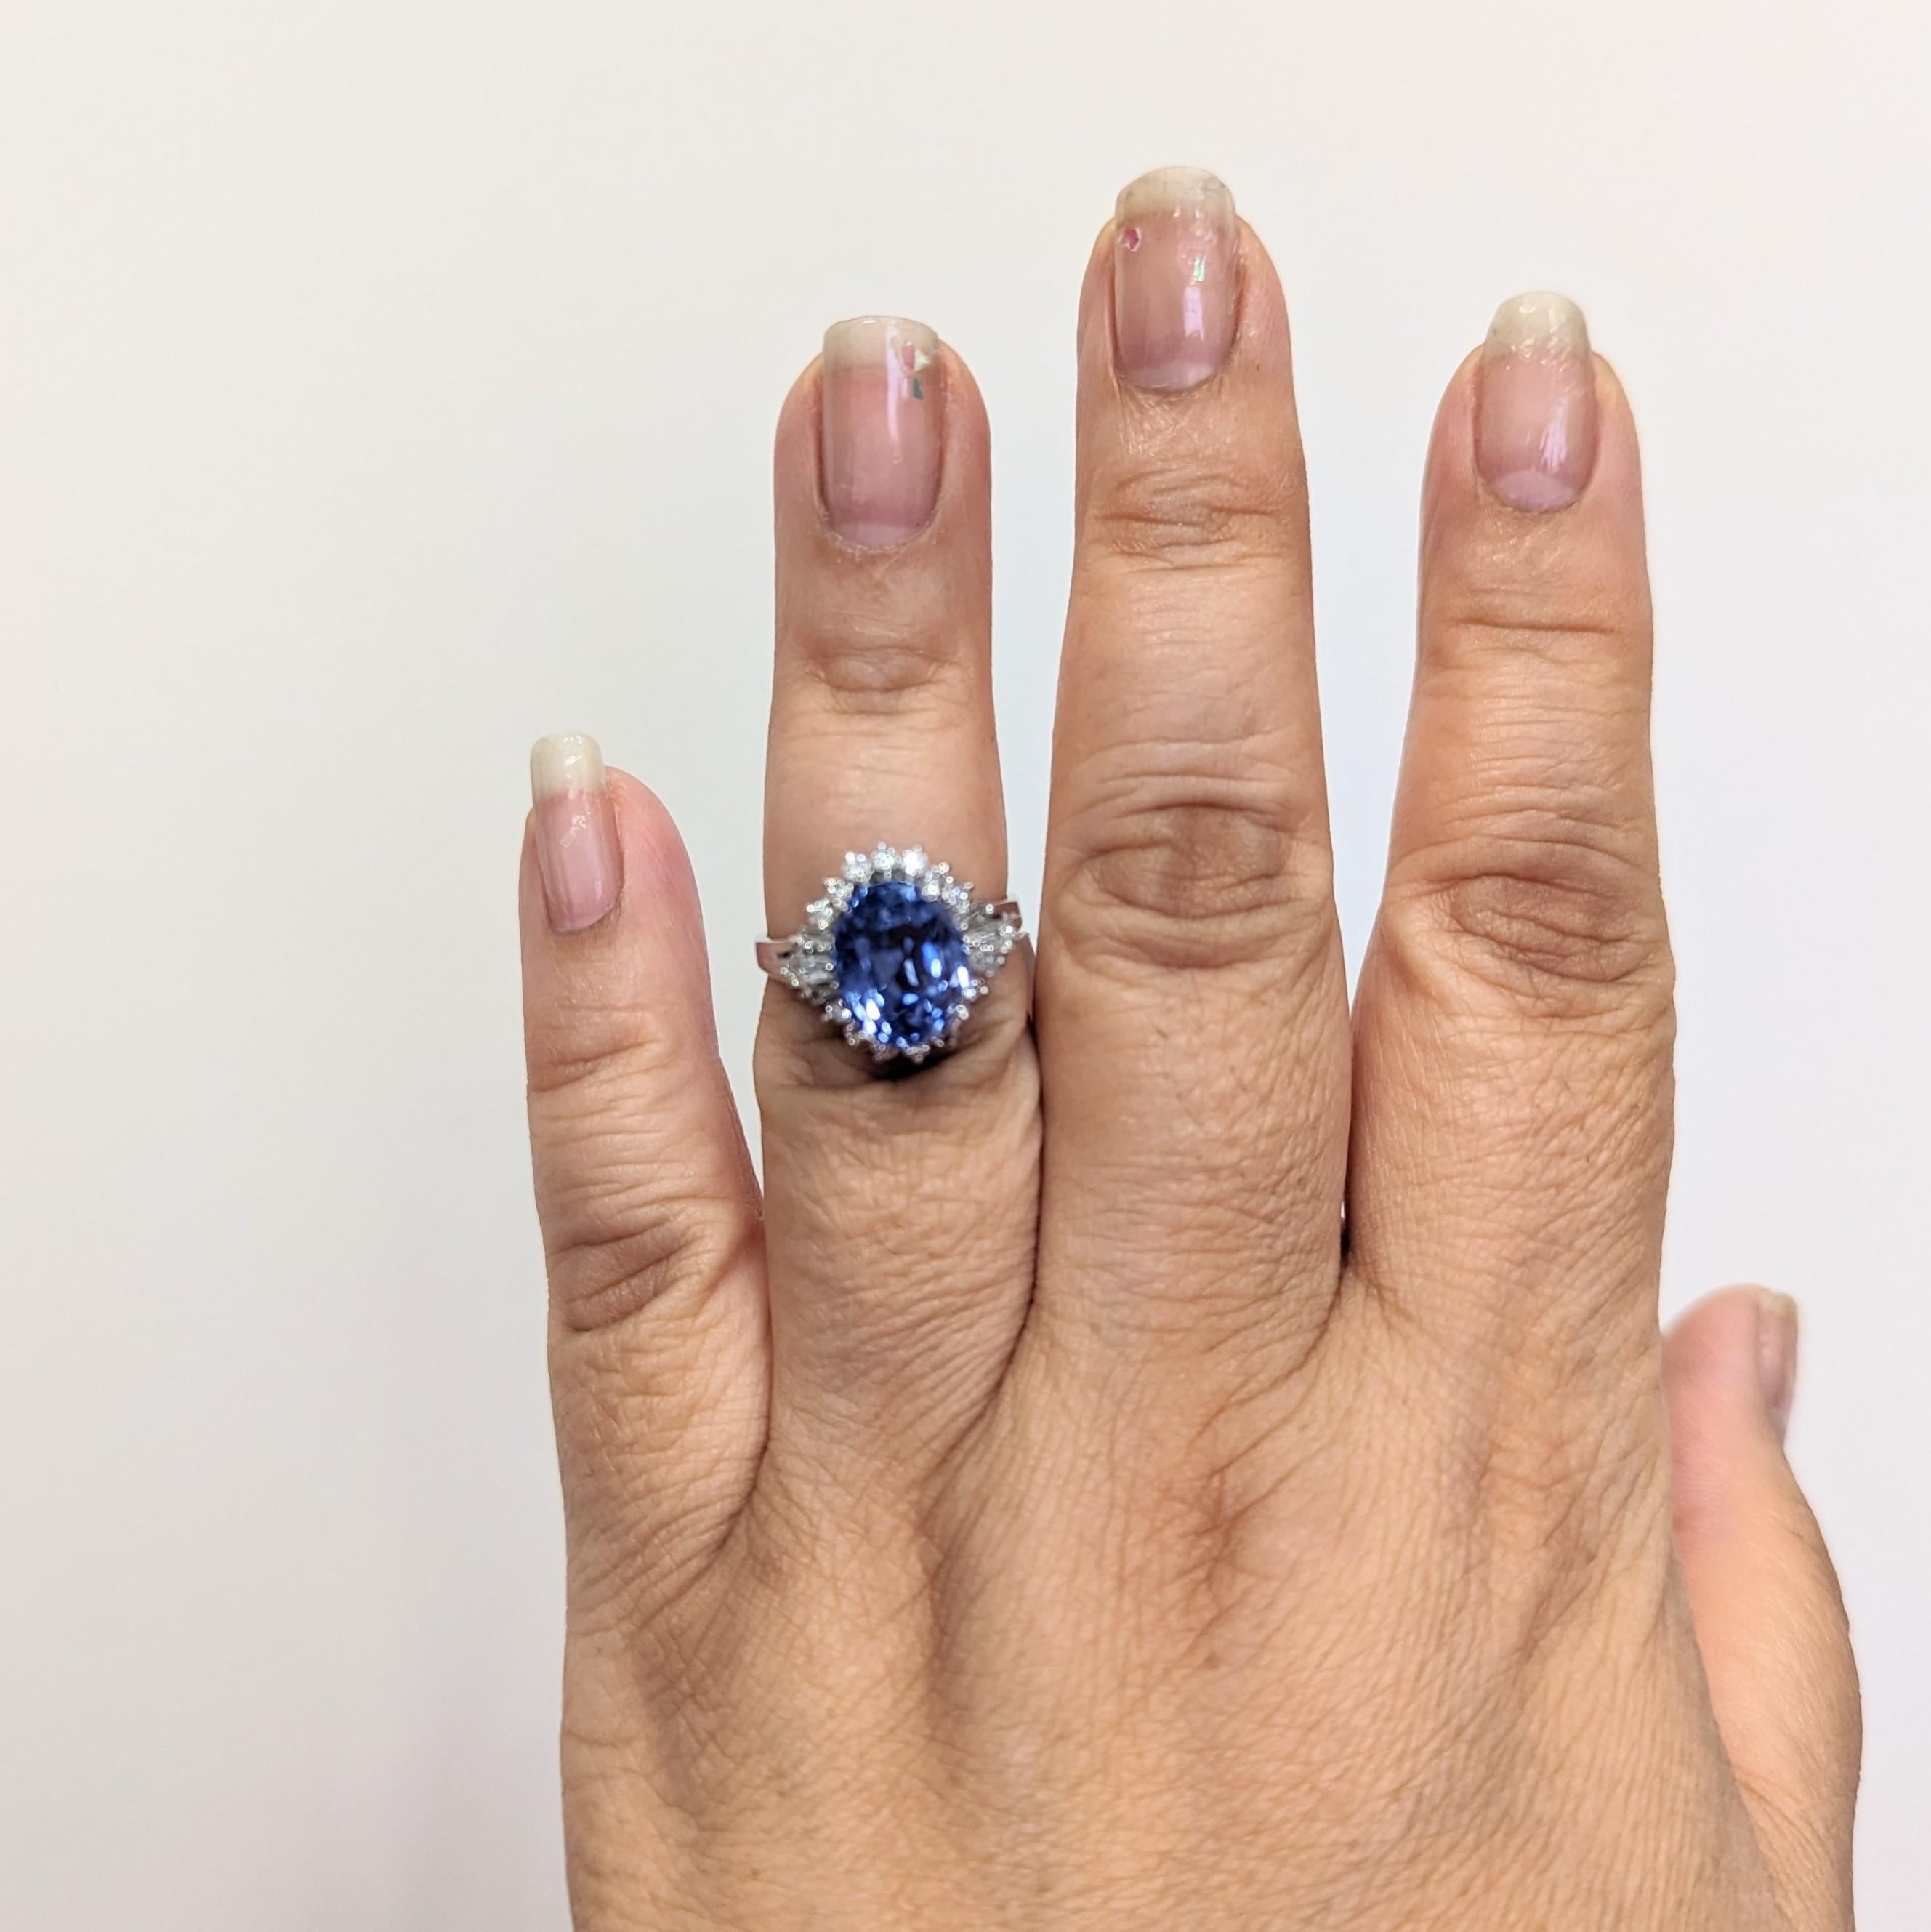 Beautiful 6.93 ct. unheated Sri Lanka blue sapphire oval with 0.62 ct. good quality white diamond baguettes and rounds.  Handmade in platinum.  Ring size 7.25.